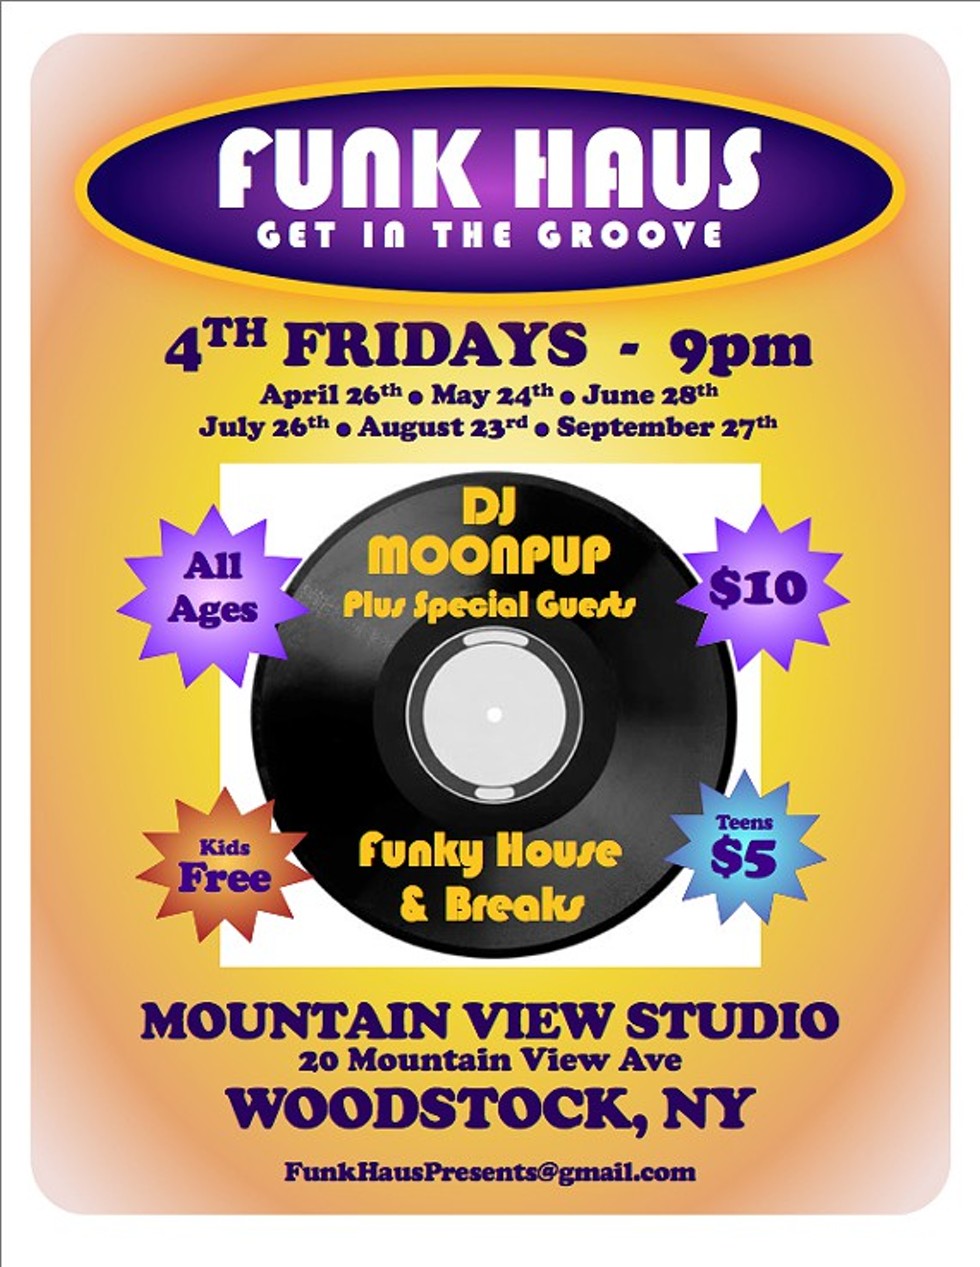 73e450ad_funk_haus_-_flyer_full_page_-_3.19.13_.jpg